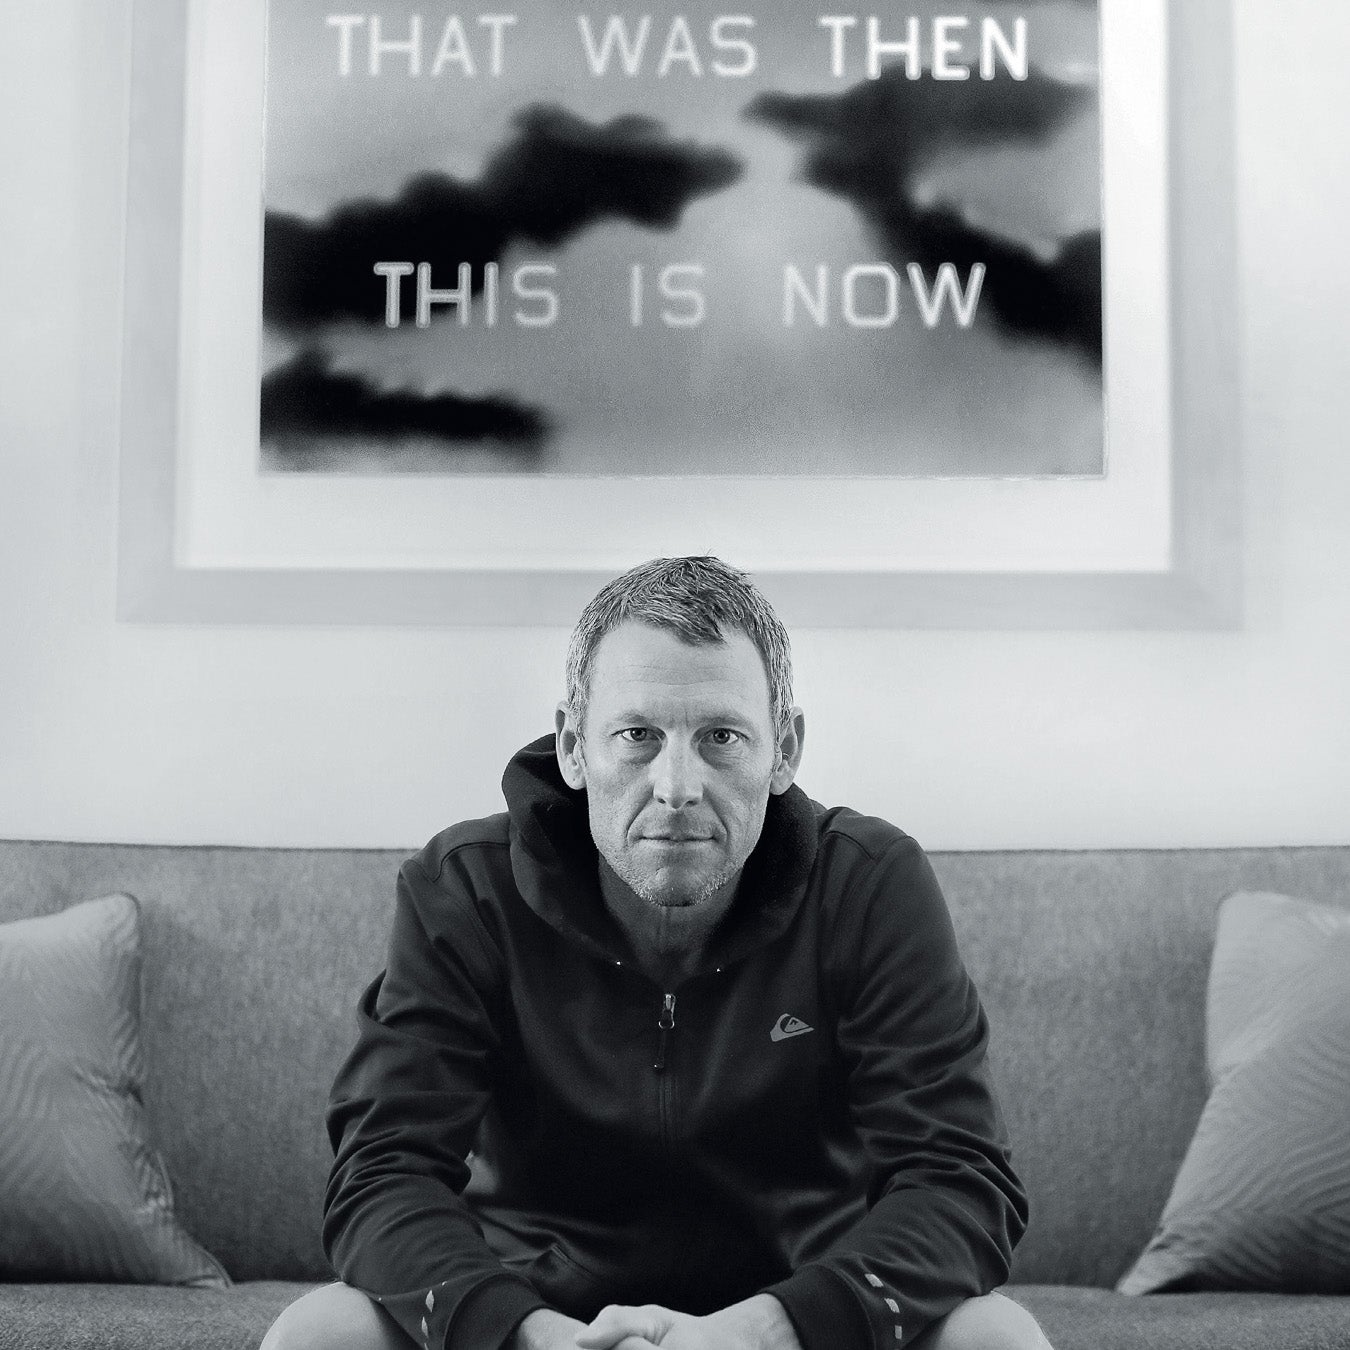 Armstrong relaxes at his home in Austin, Texas February 5, 2016 under an art piece by friend and famous American artist Ed Ruscha.